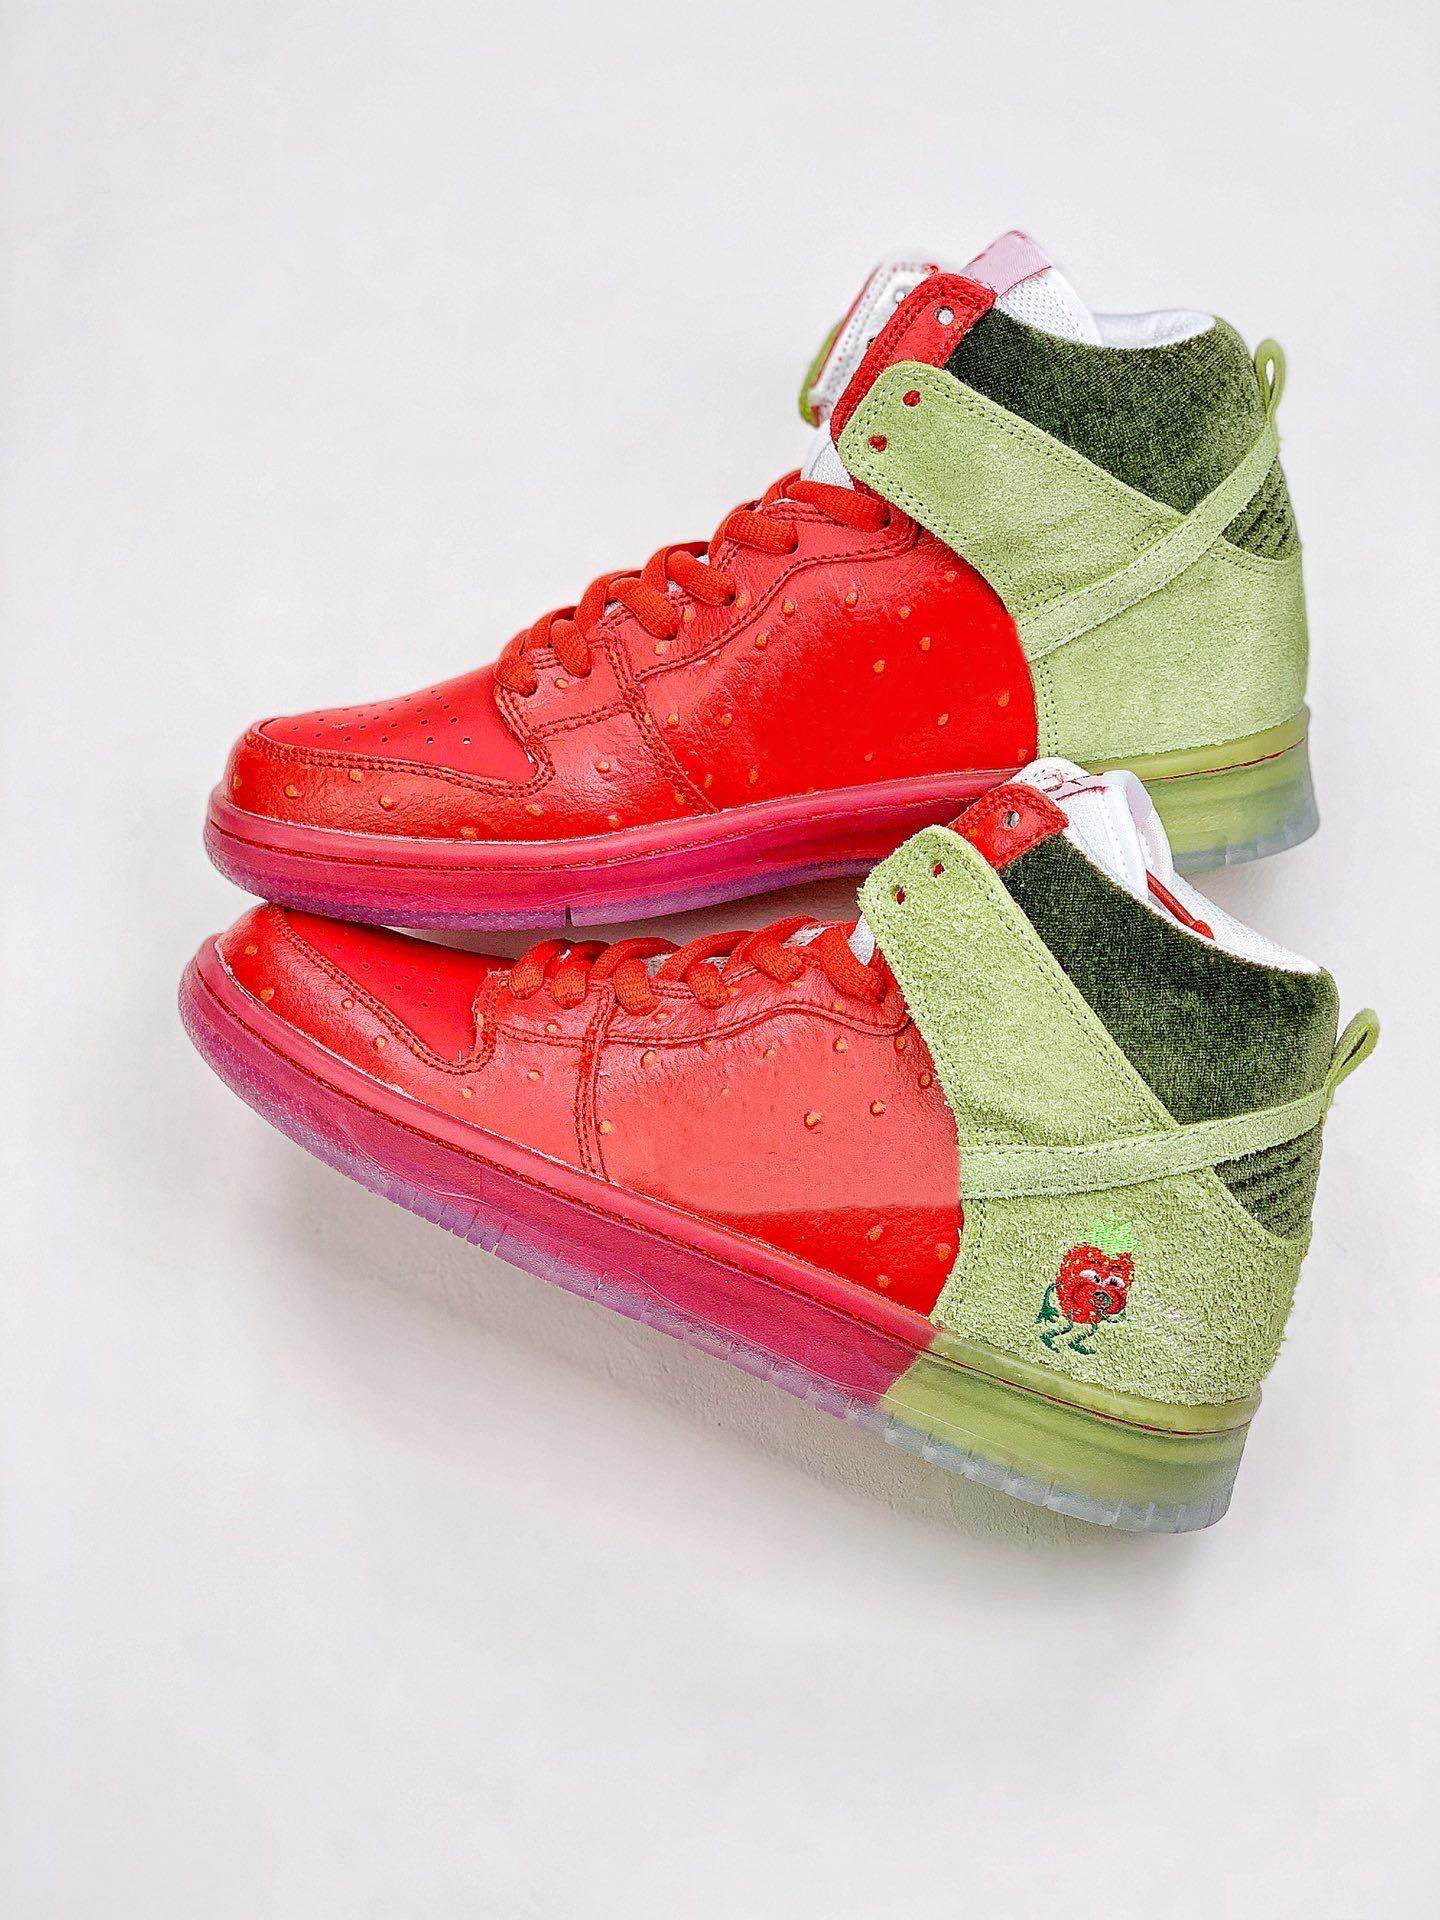 

Best SB Dunk High Strawberry Cough Release Info Skateboarding Shoes Men Women casual Shoes With box free delivery, Red